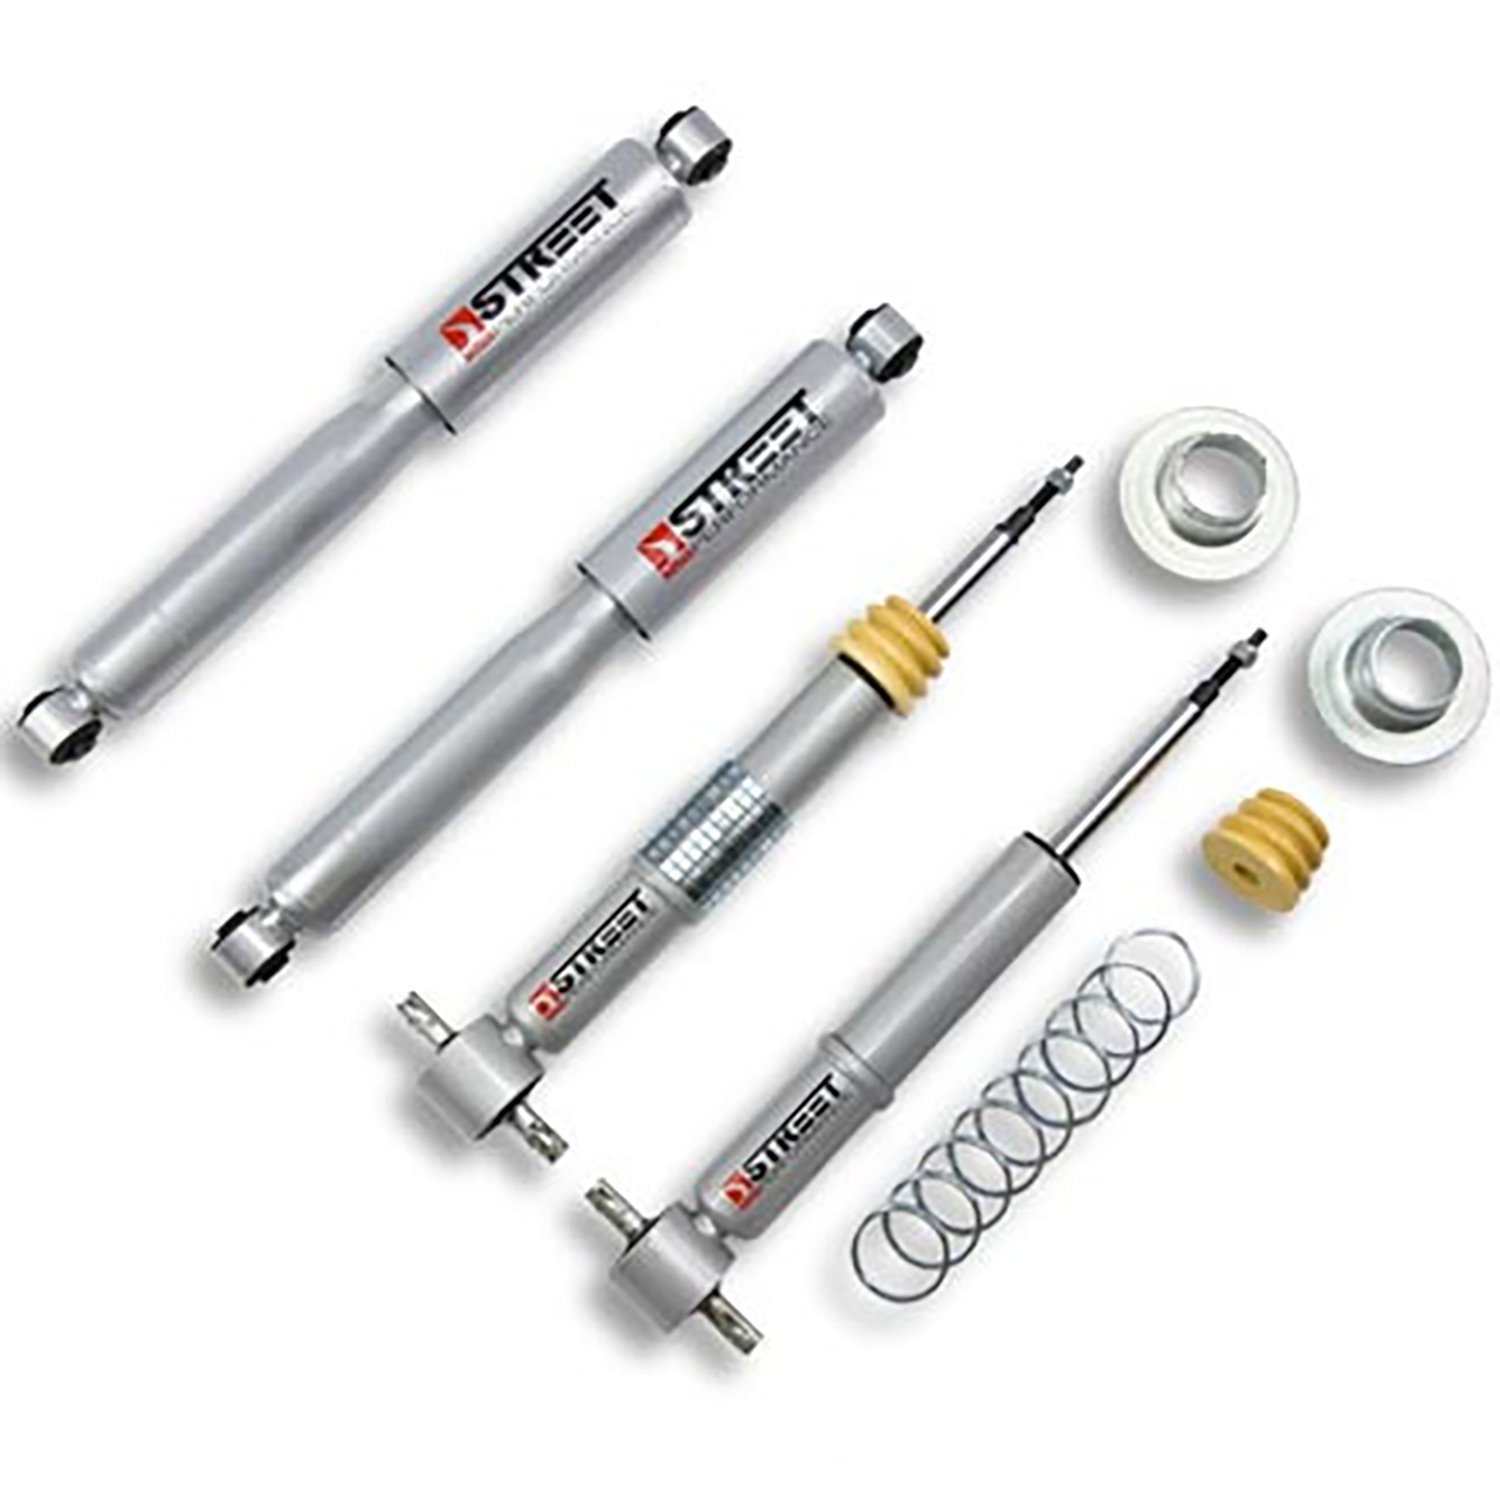 Street Performance Shock Set for Lowered 2007-2013 Chevy/GMC